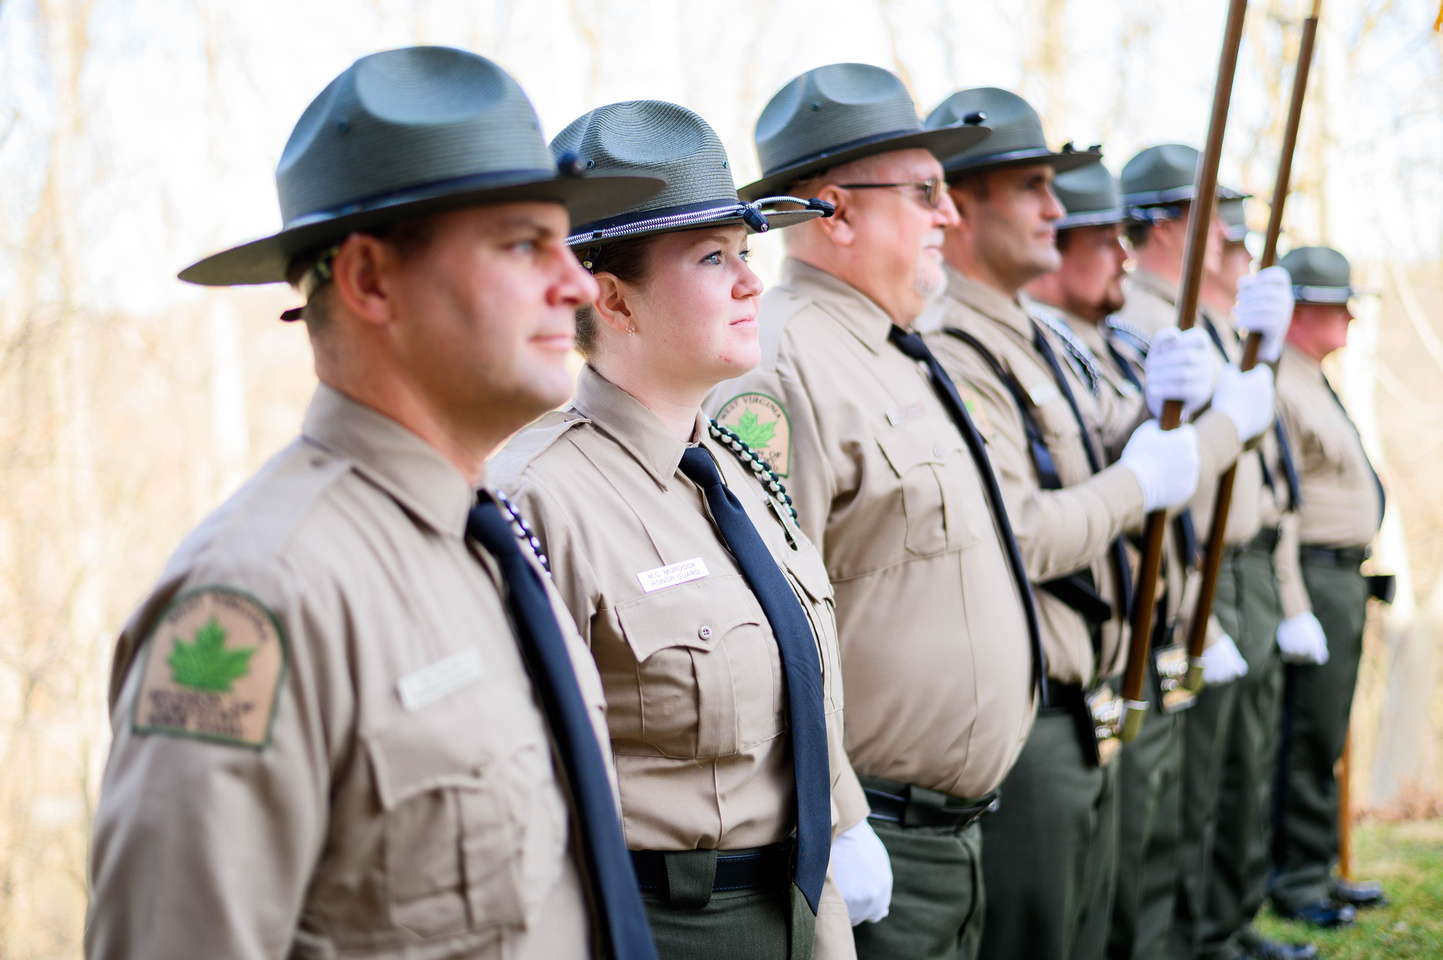 Forestry's new Honor Guard pays tribute to those who have served